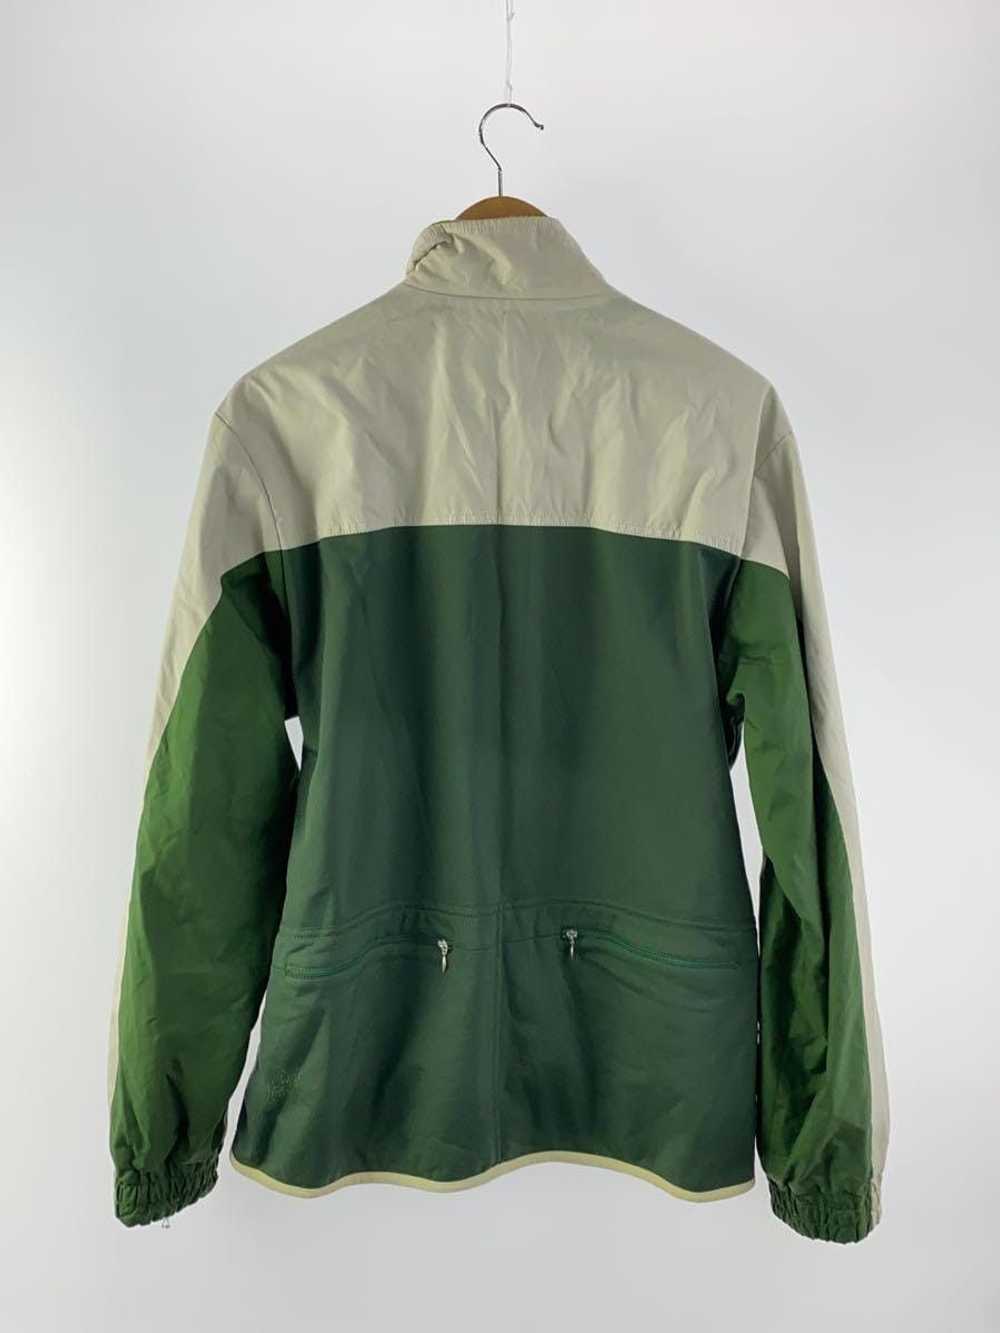 General Research 🐎 2001 2 Tone Jacket - image 2